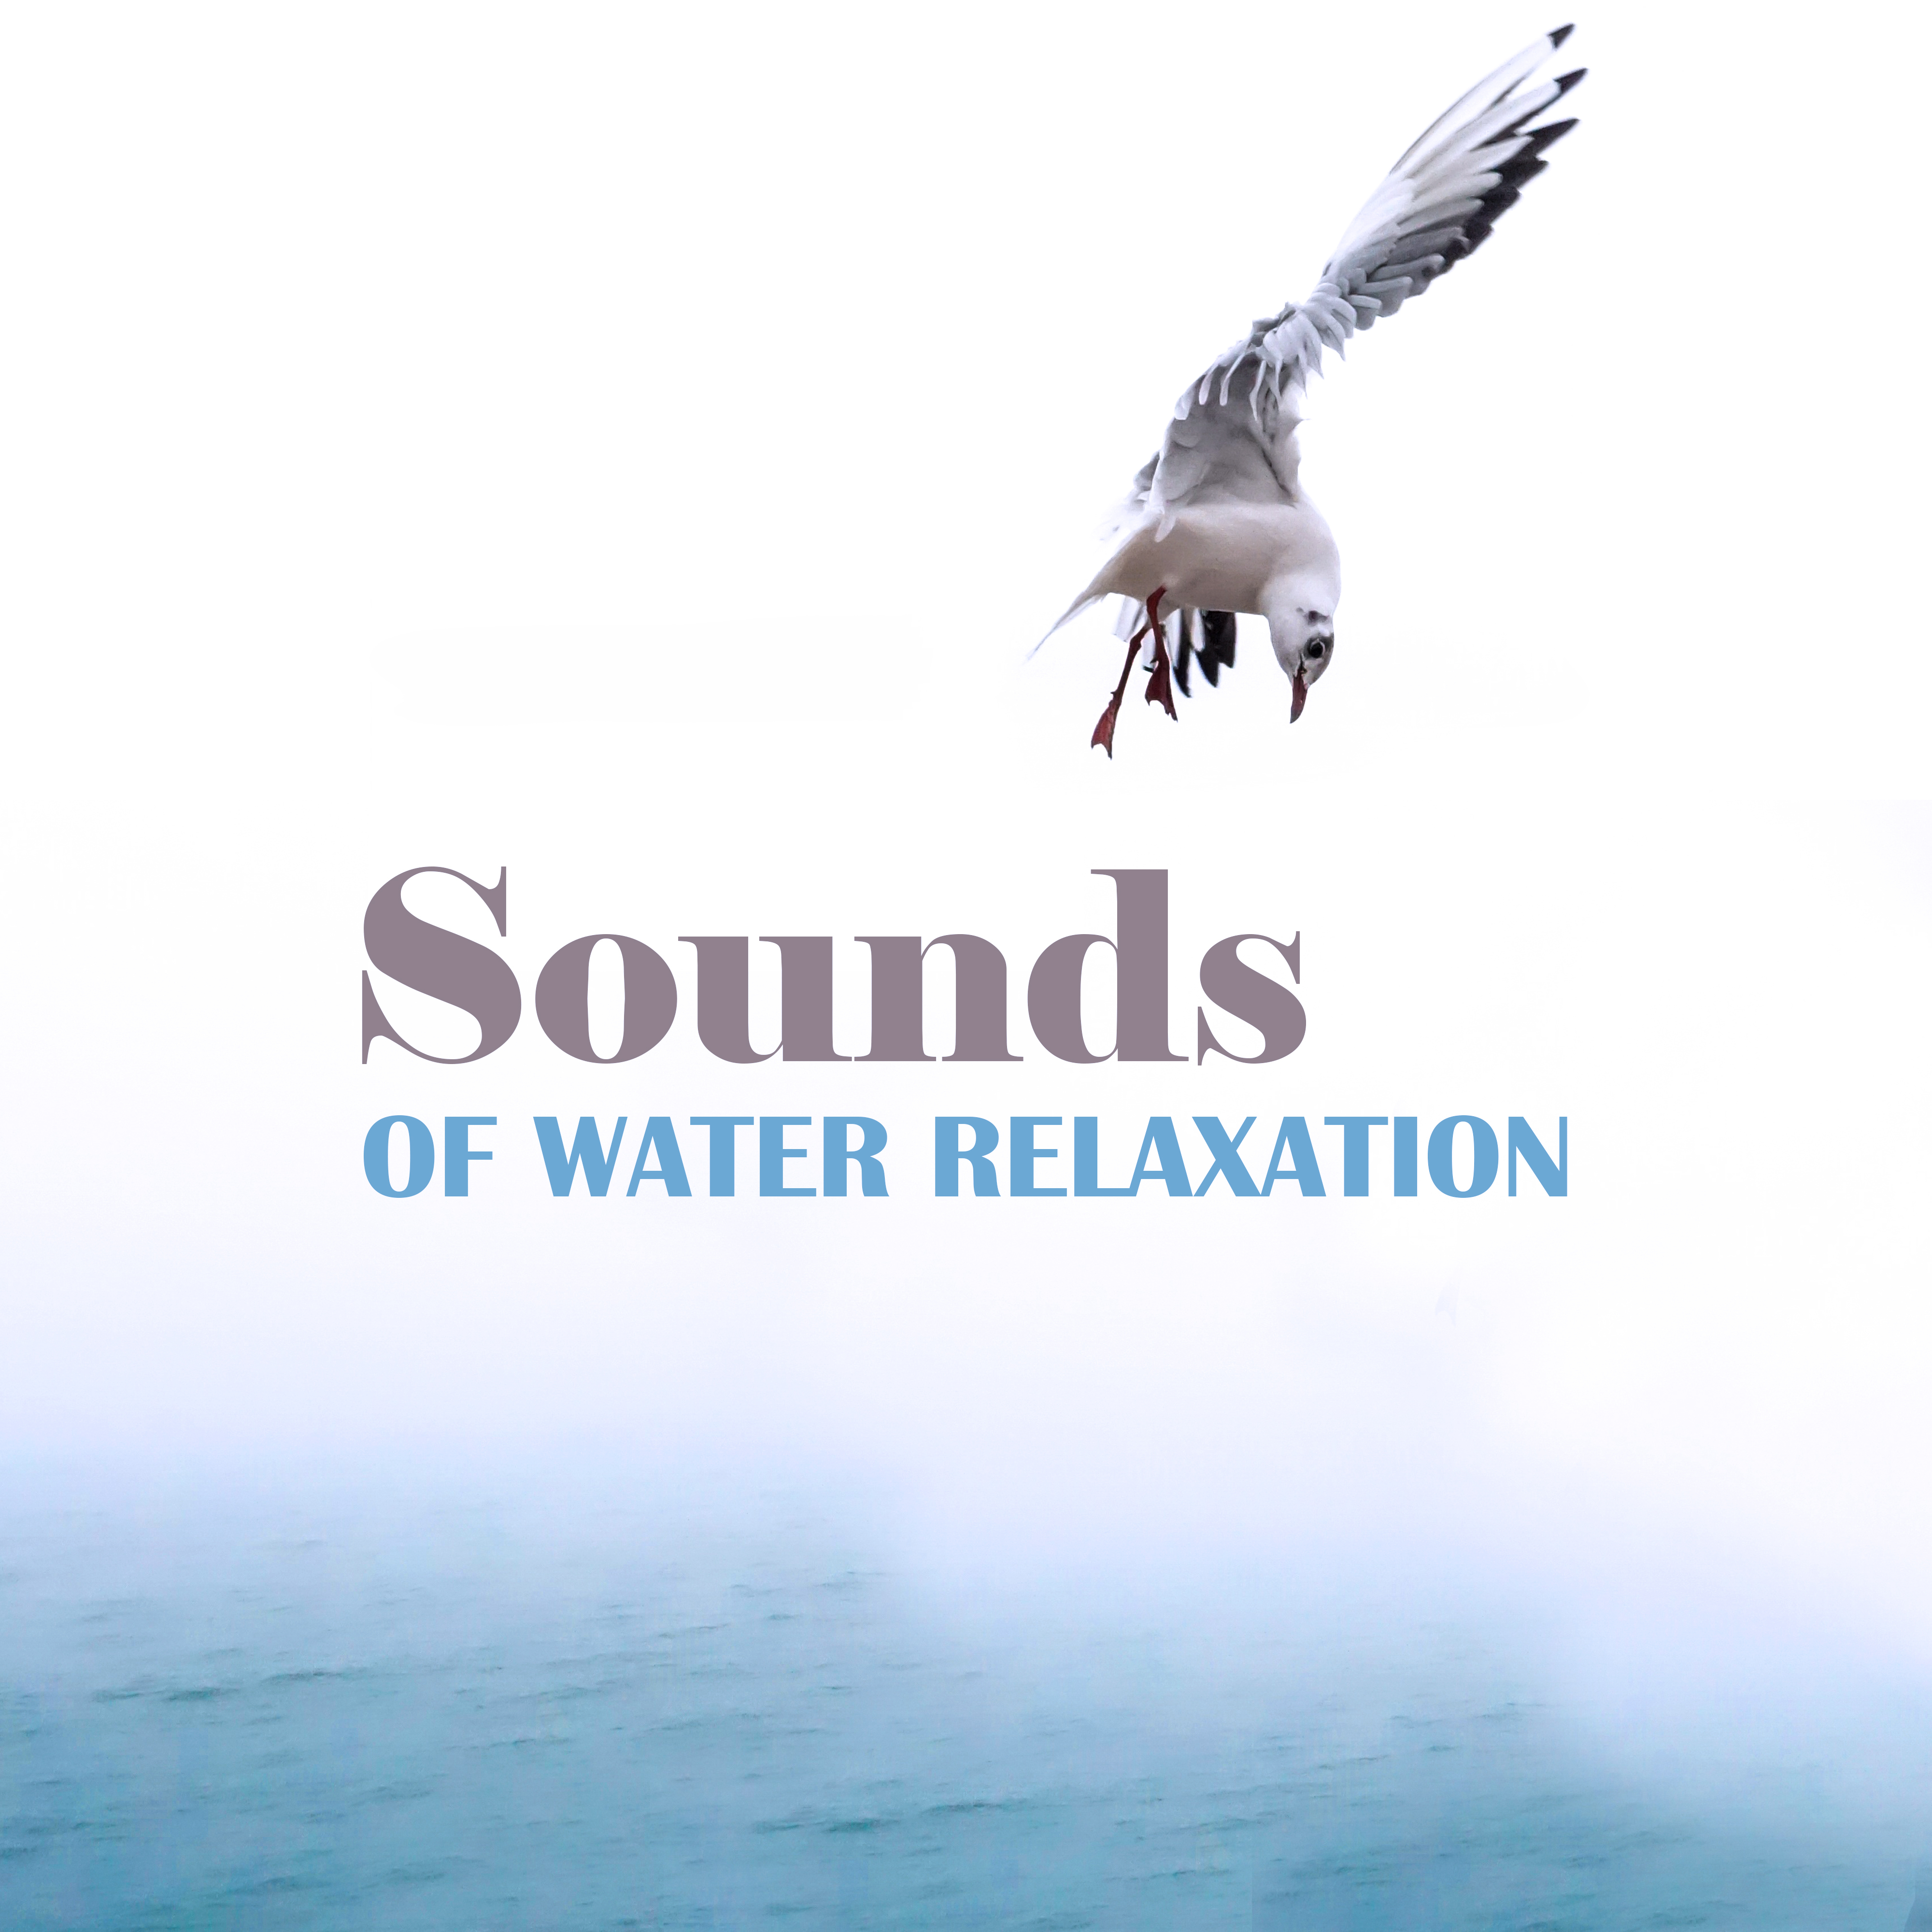 Sounds of Water Relaxation